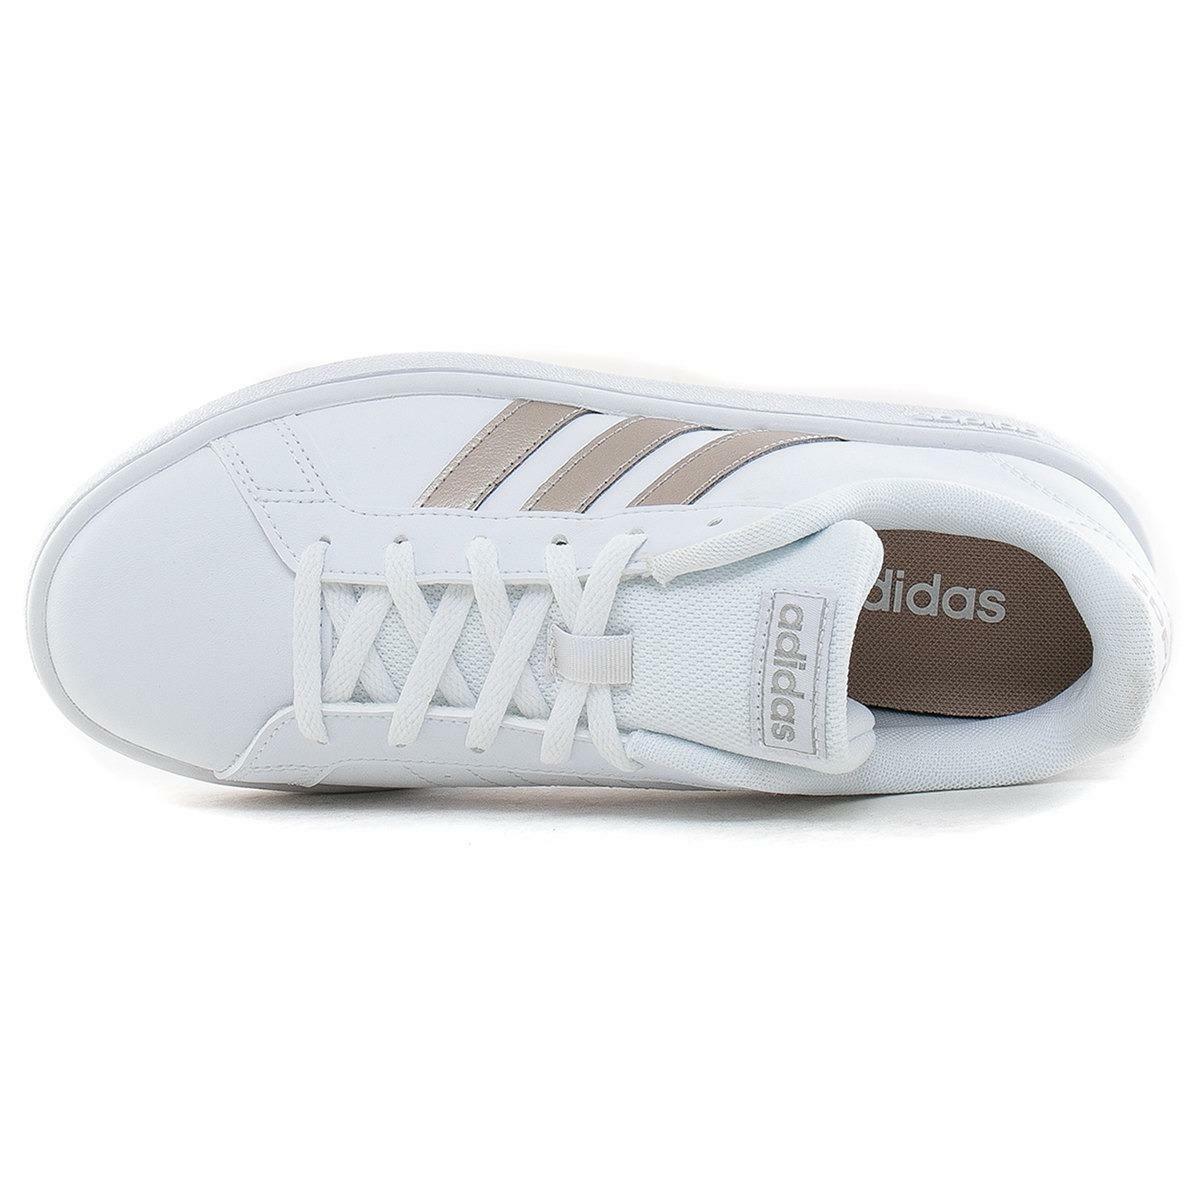 adidas sneakers adidas grand court base ee7874. unisex adulto, colore bianco